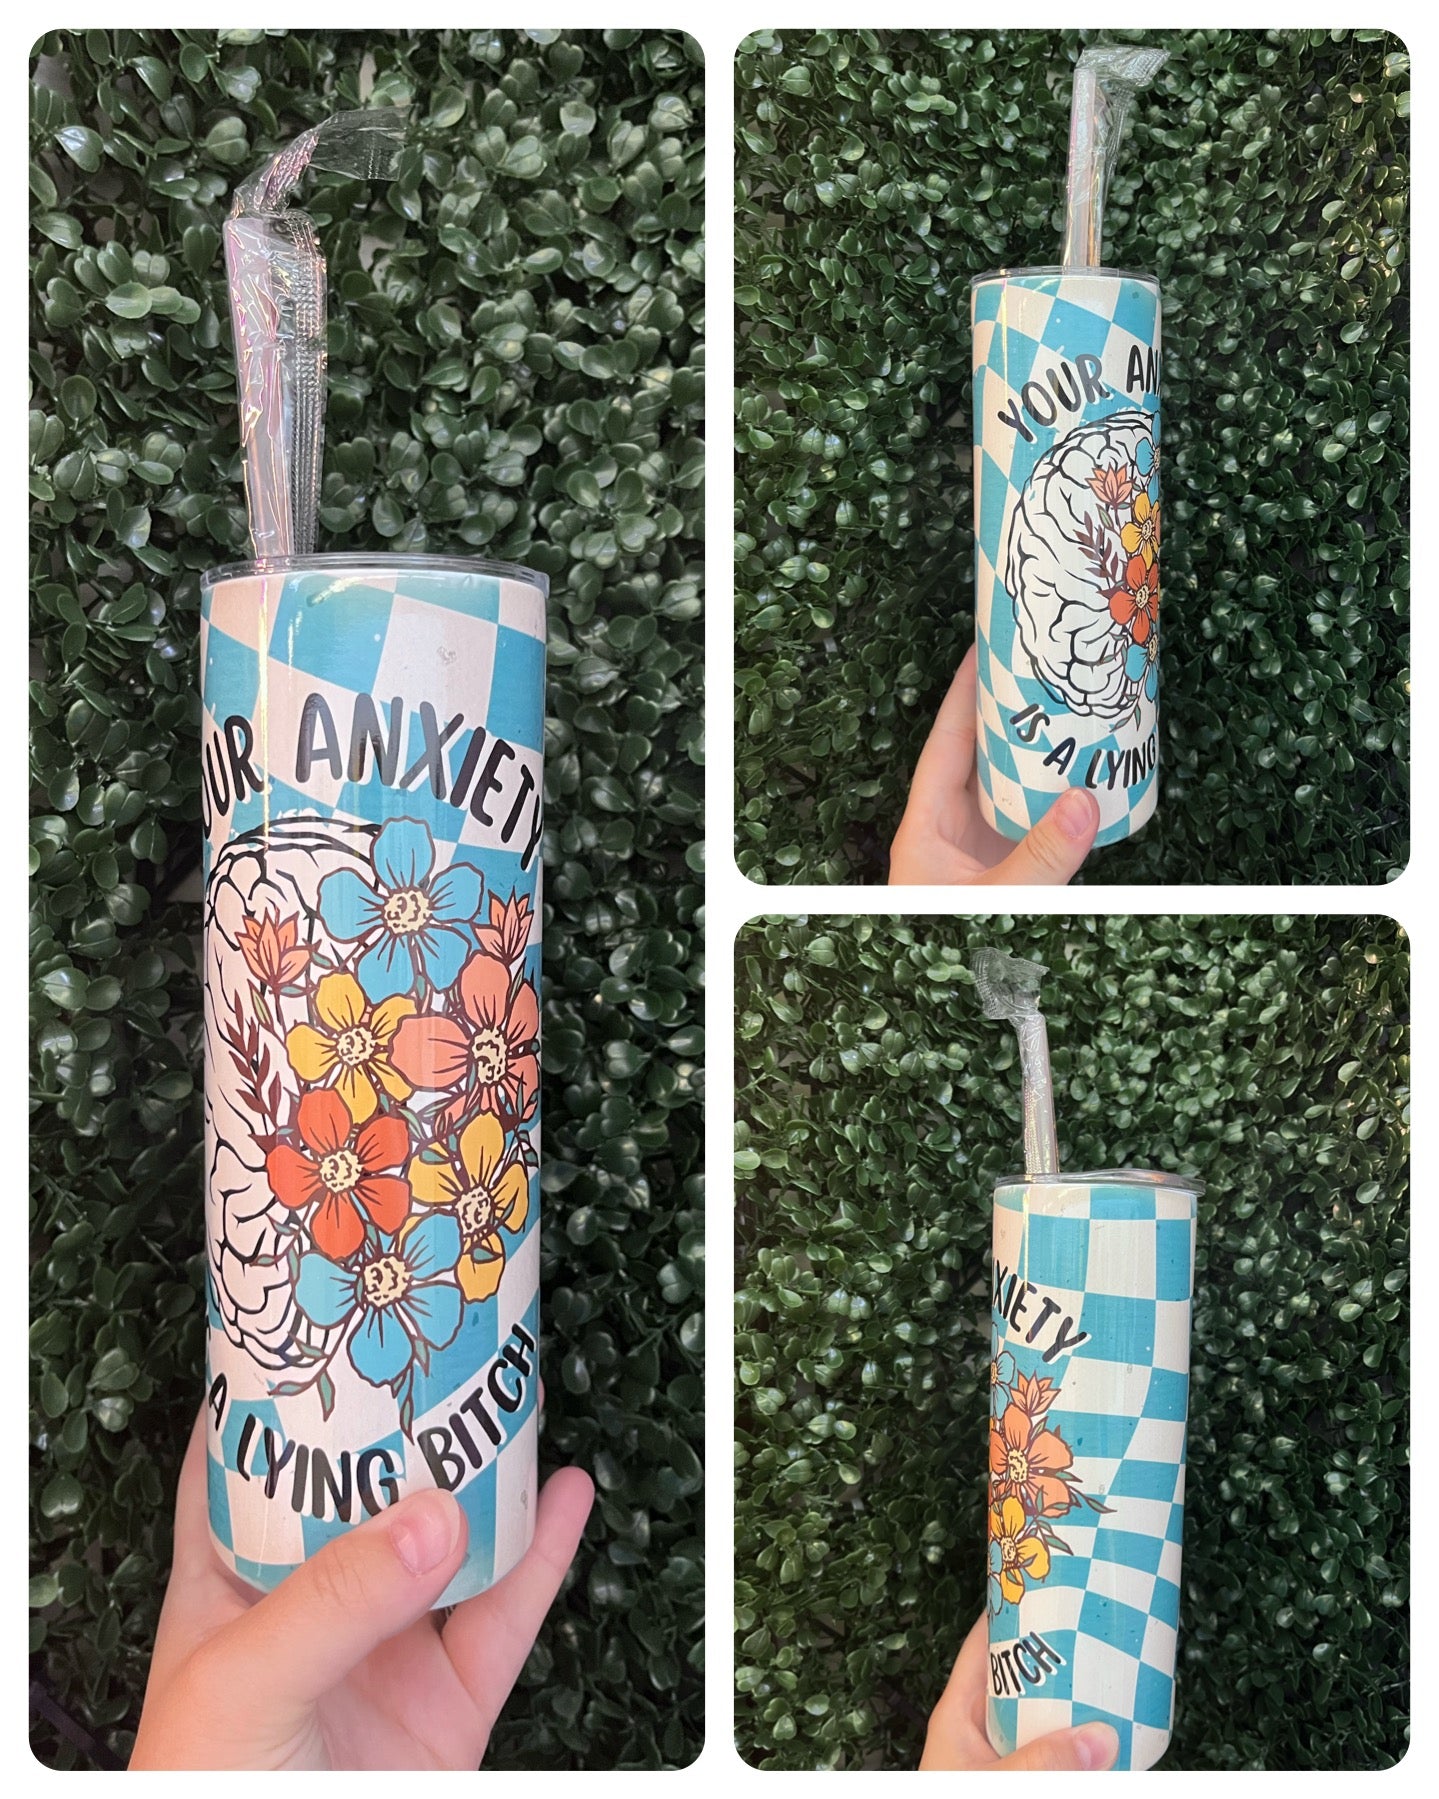 Your Anxiety is a lying B*tch 20oz tumbler